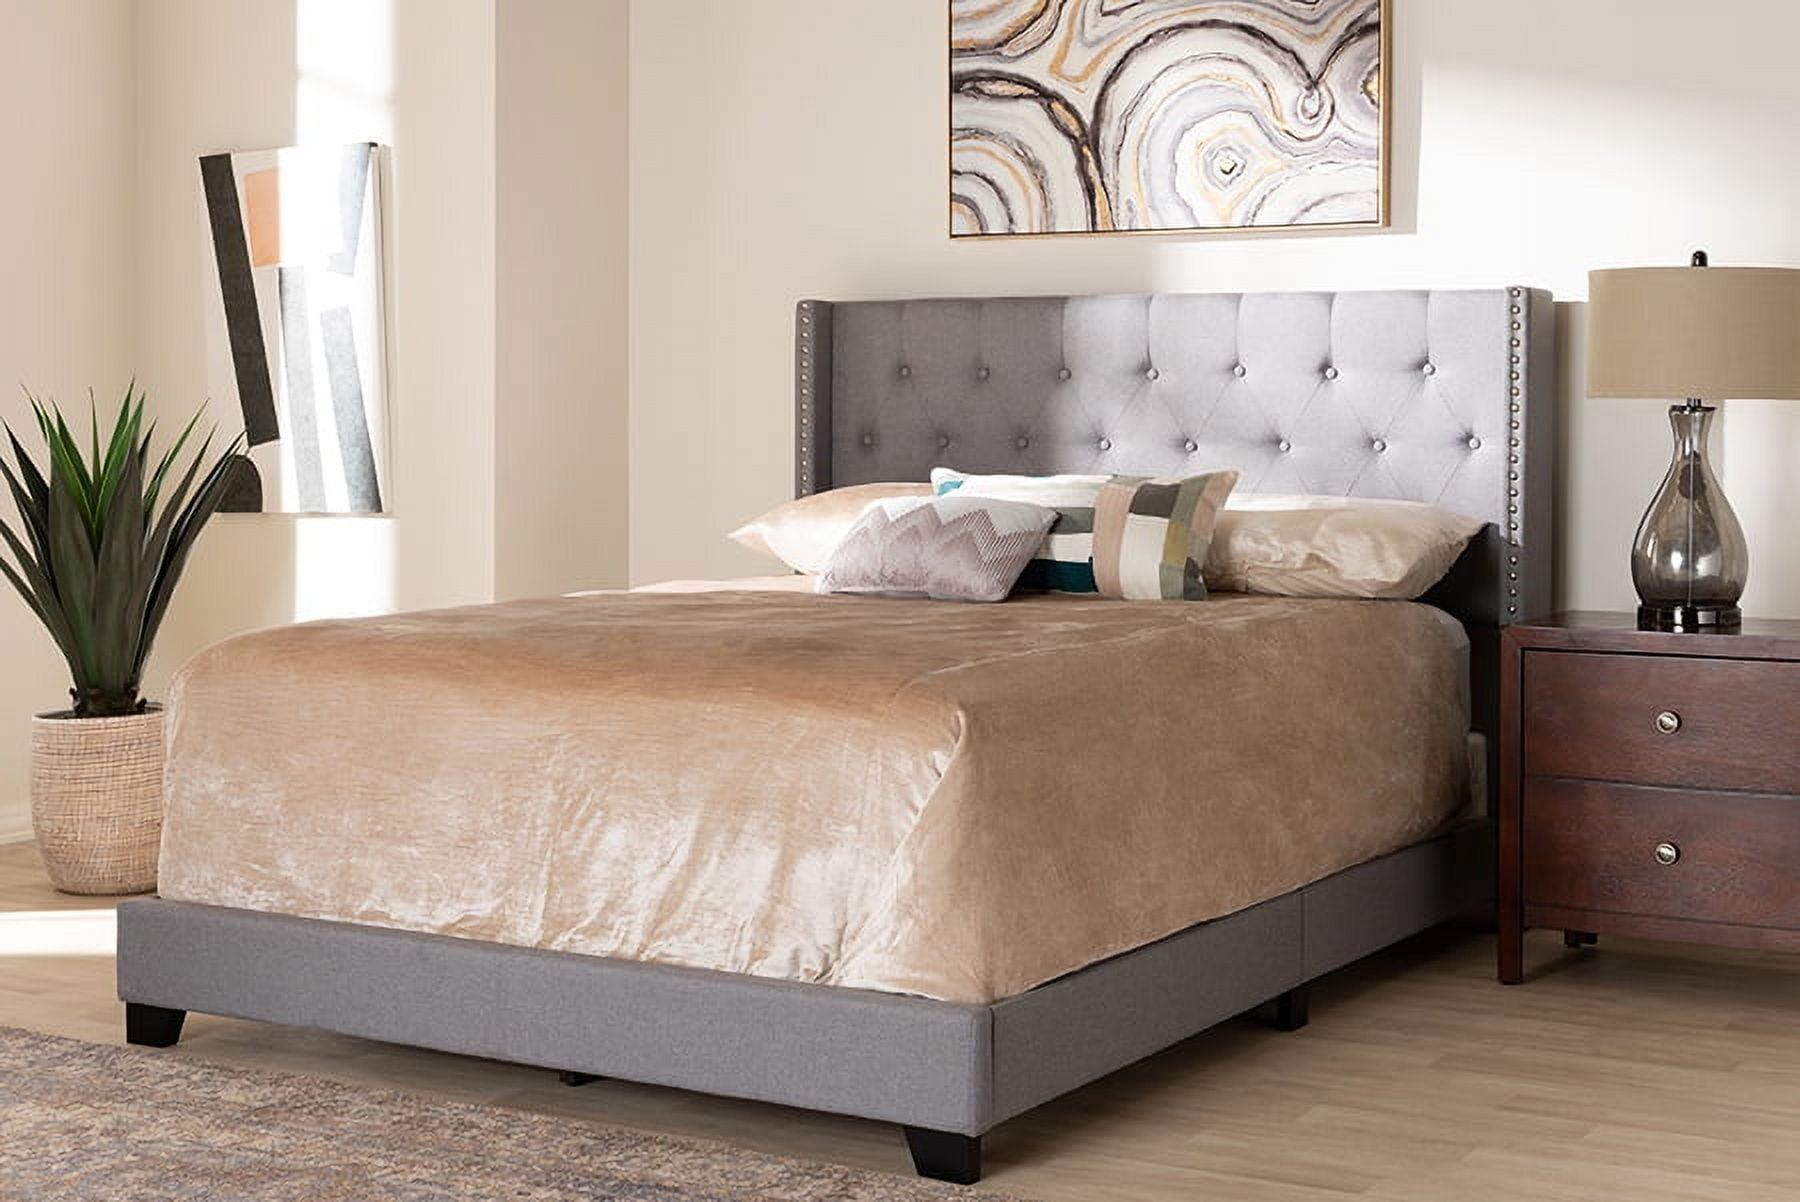 King-Sized Brady Bed with Nailhead Trim Light Gray Upholstered Frame